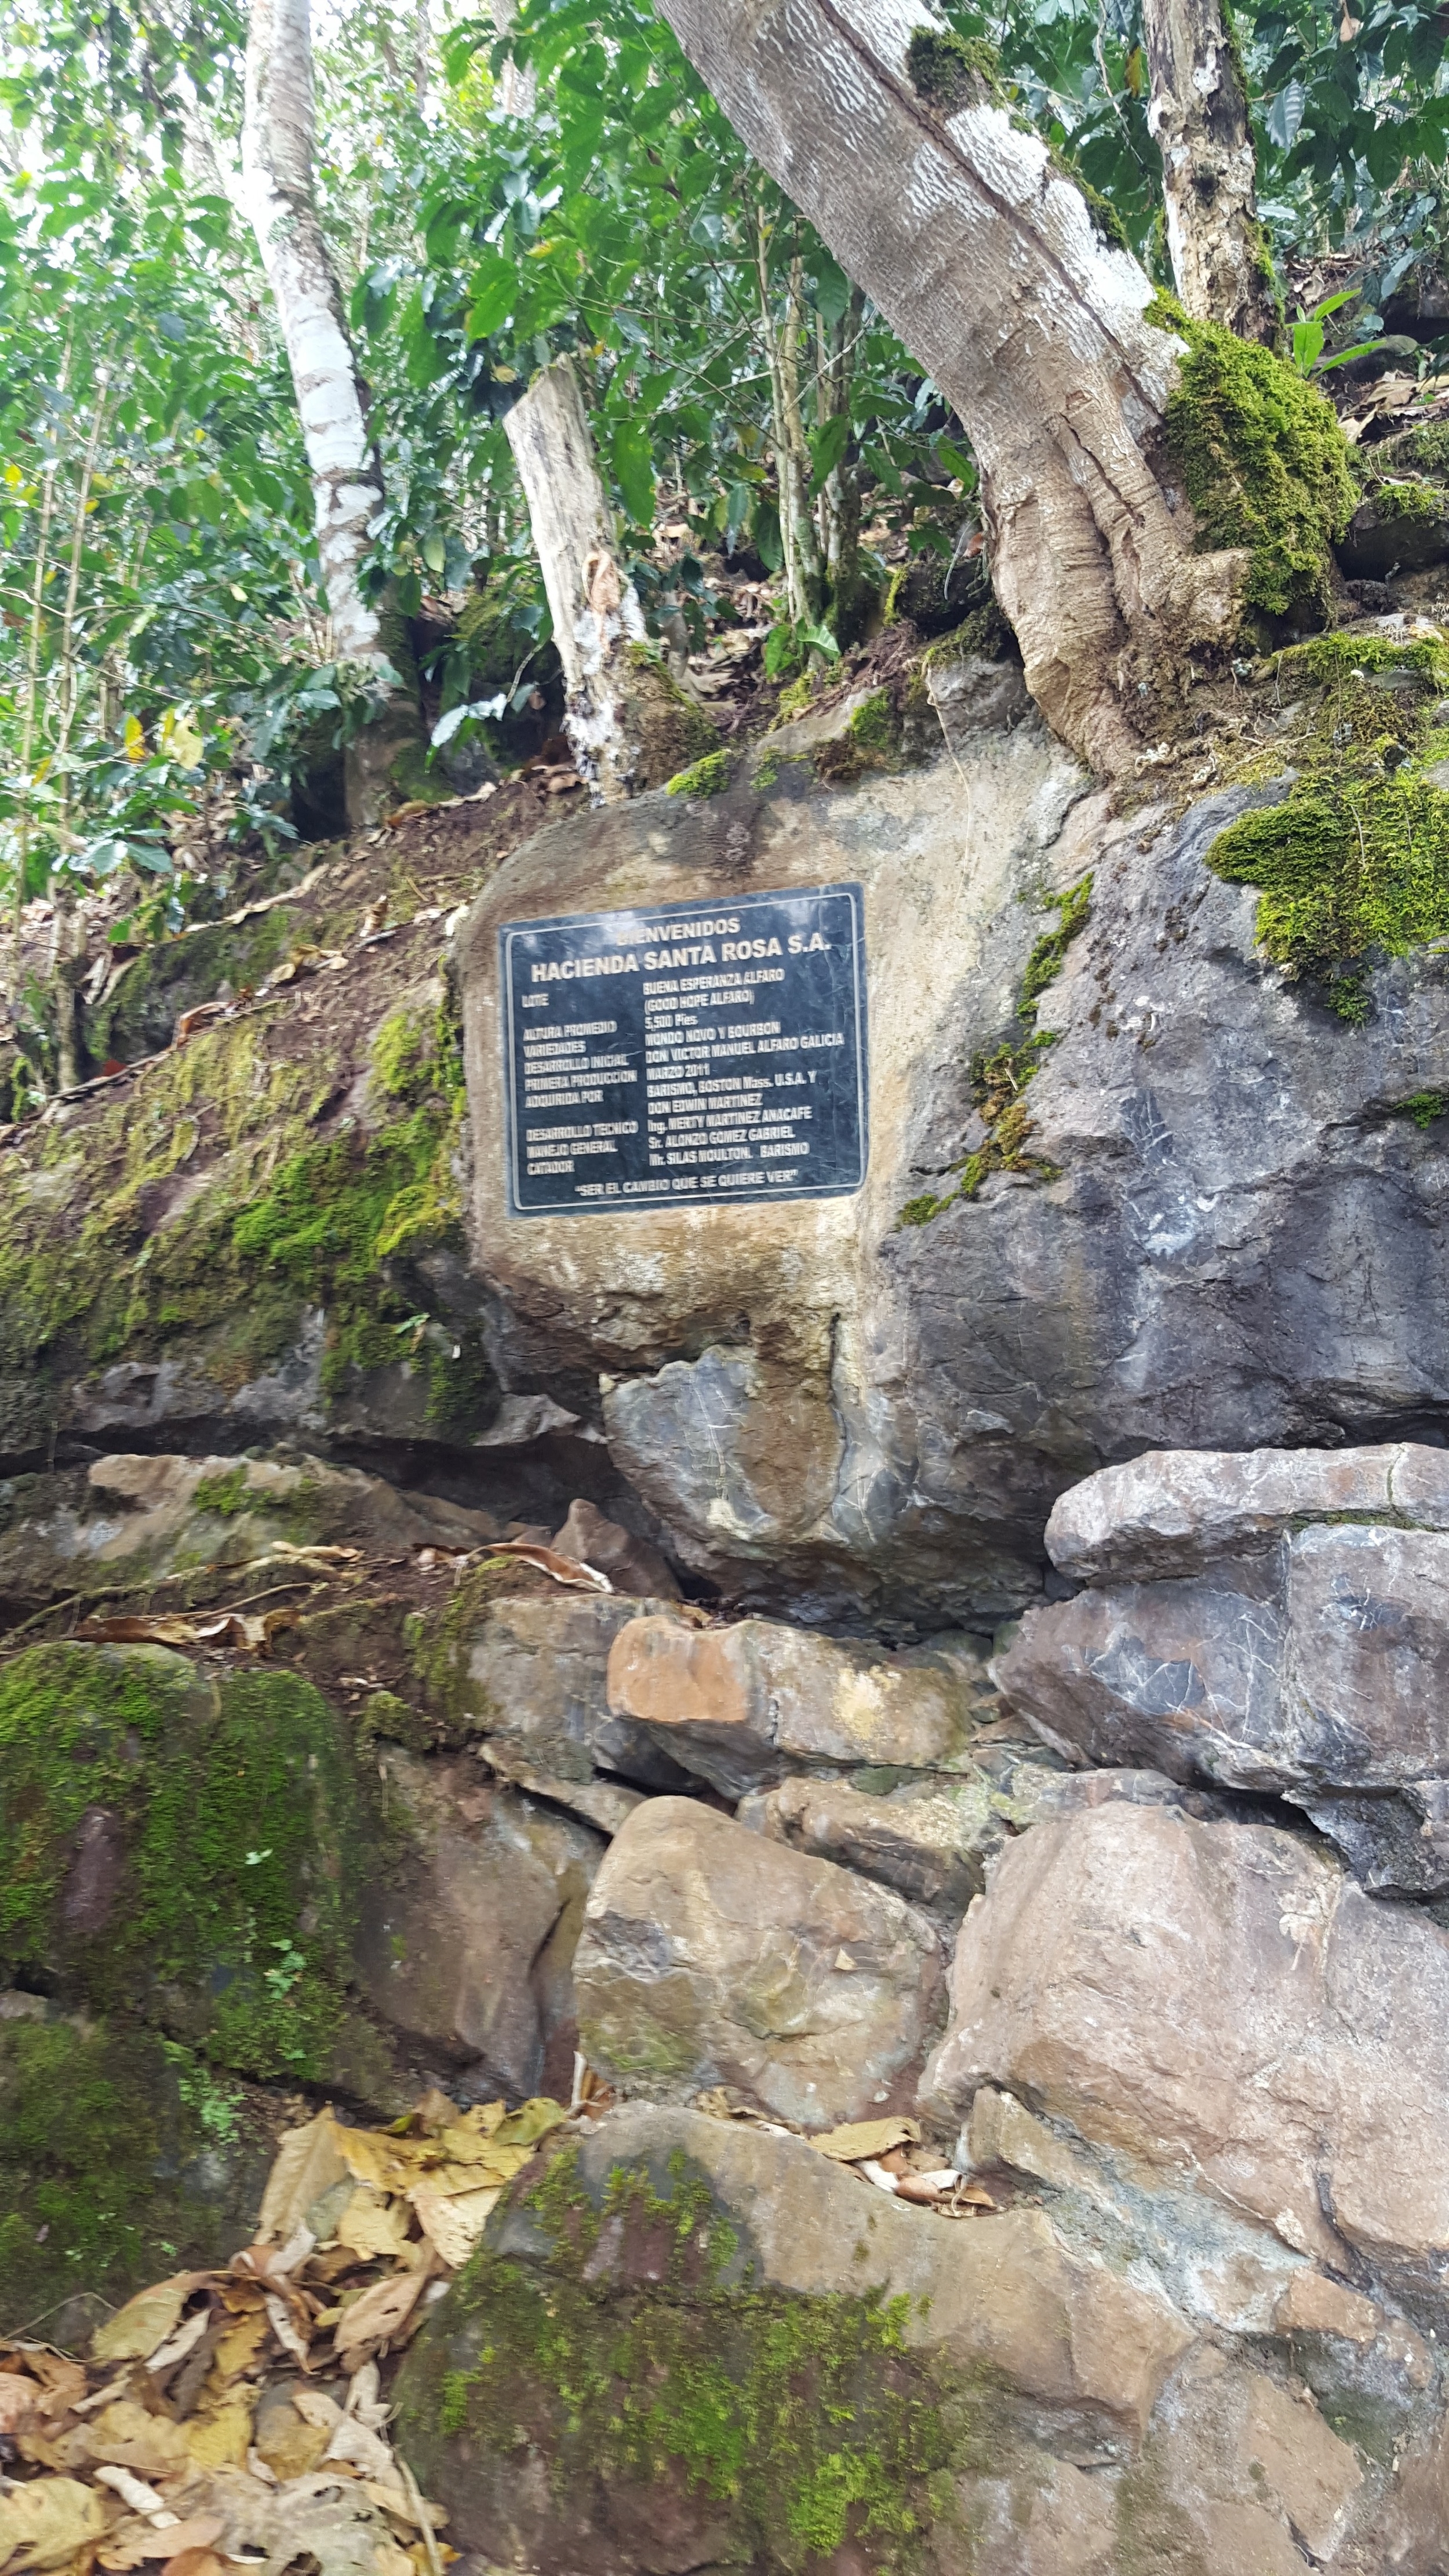  Plaque on the trail leading up to Buena Esperanza, commemorating the inaugural harvest. 